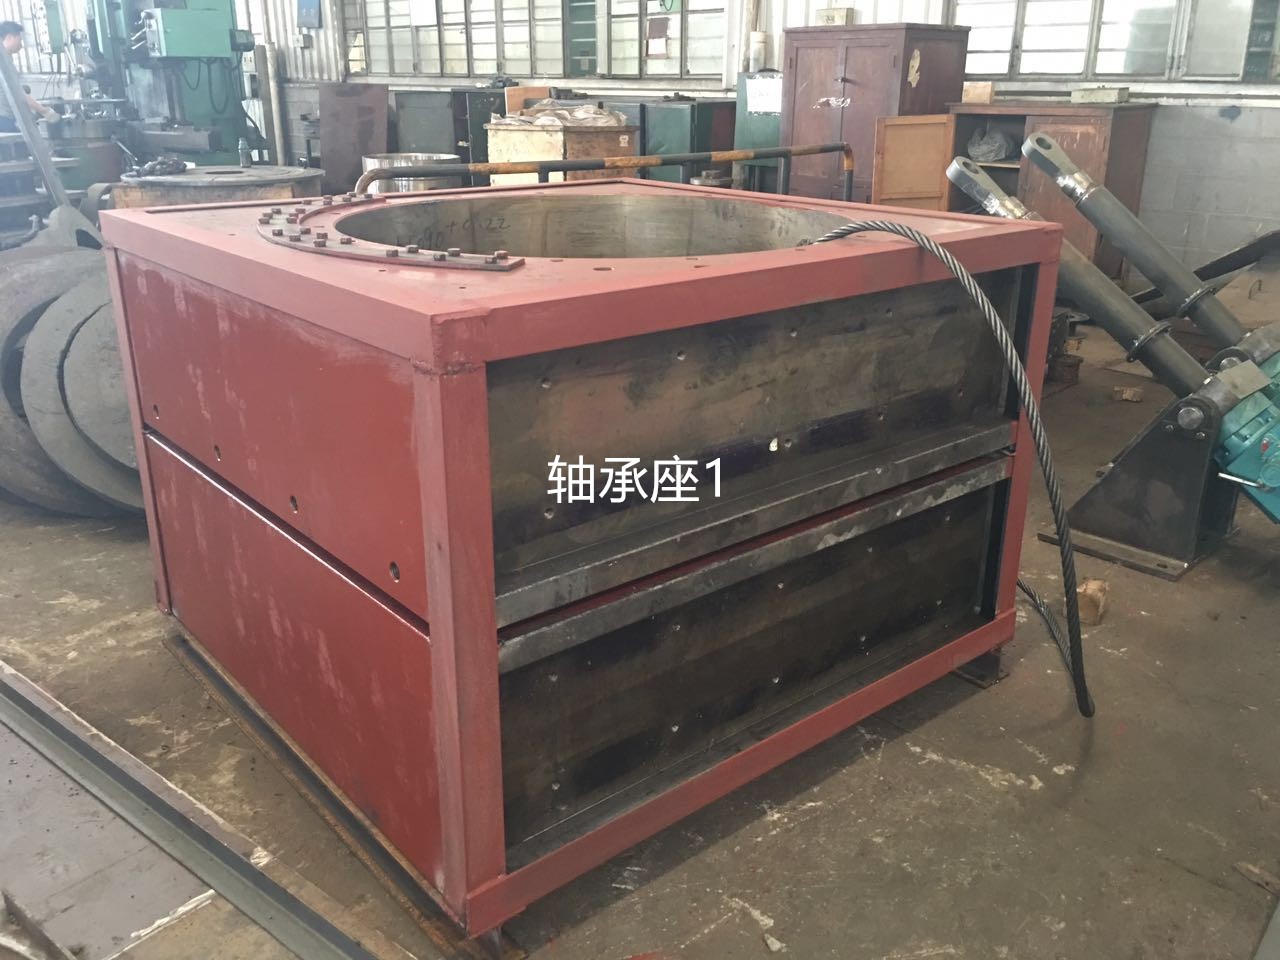 Removable Bearing House HFCG140-65,for roller press